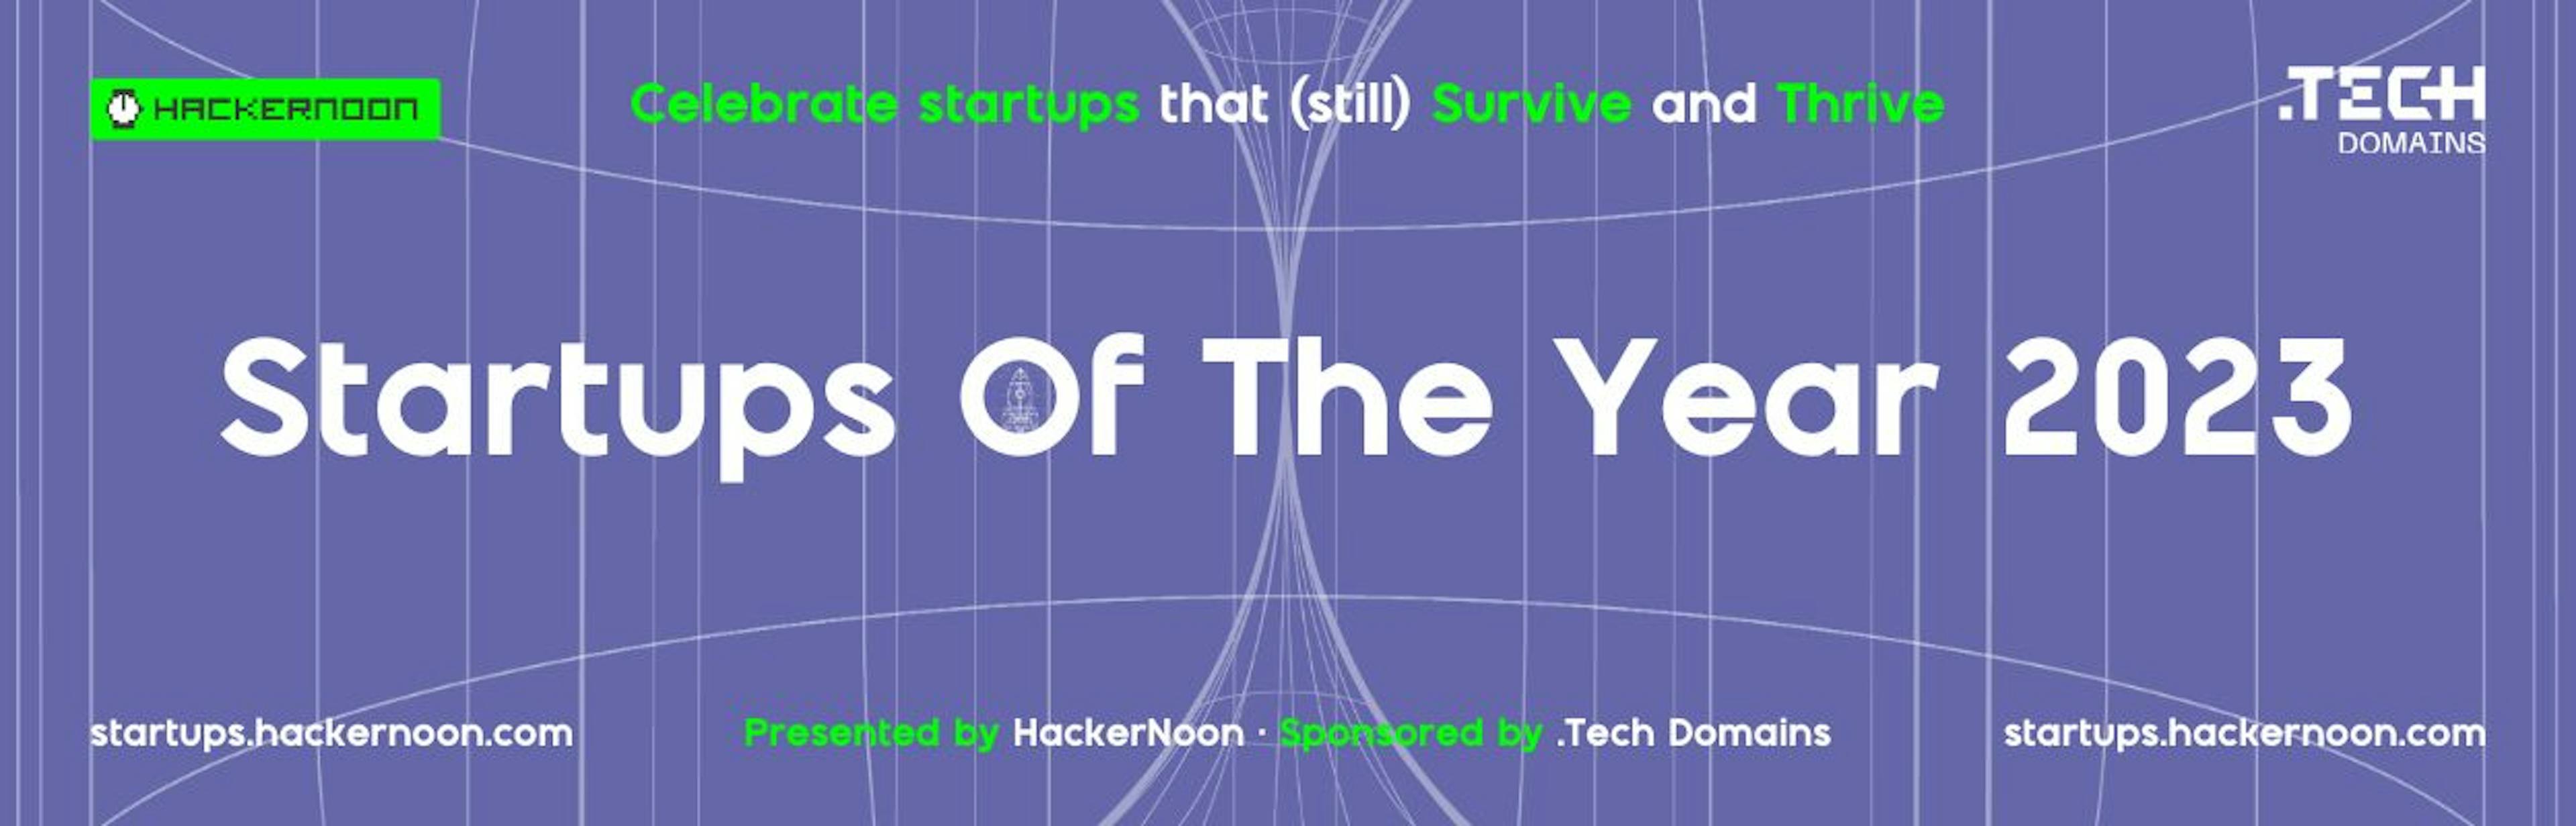 featured image - Startups of The Year 2023: 130+ Startups Nominated in San Diego